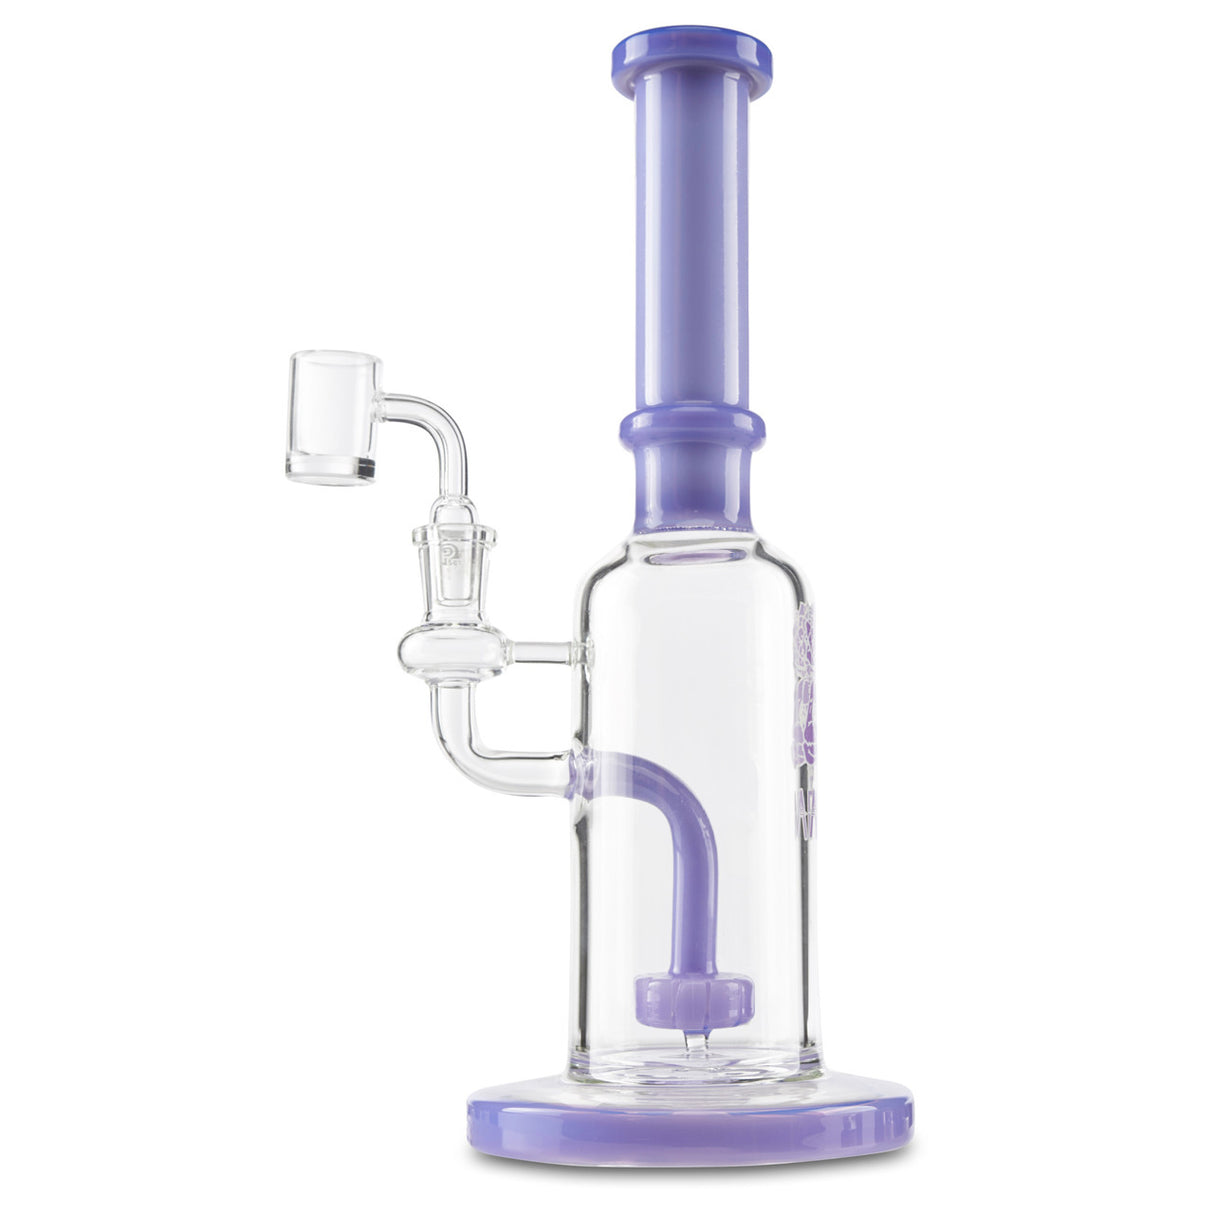 afm cheap glass bong for dry herb and oils for sale